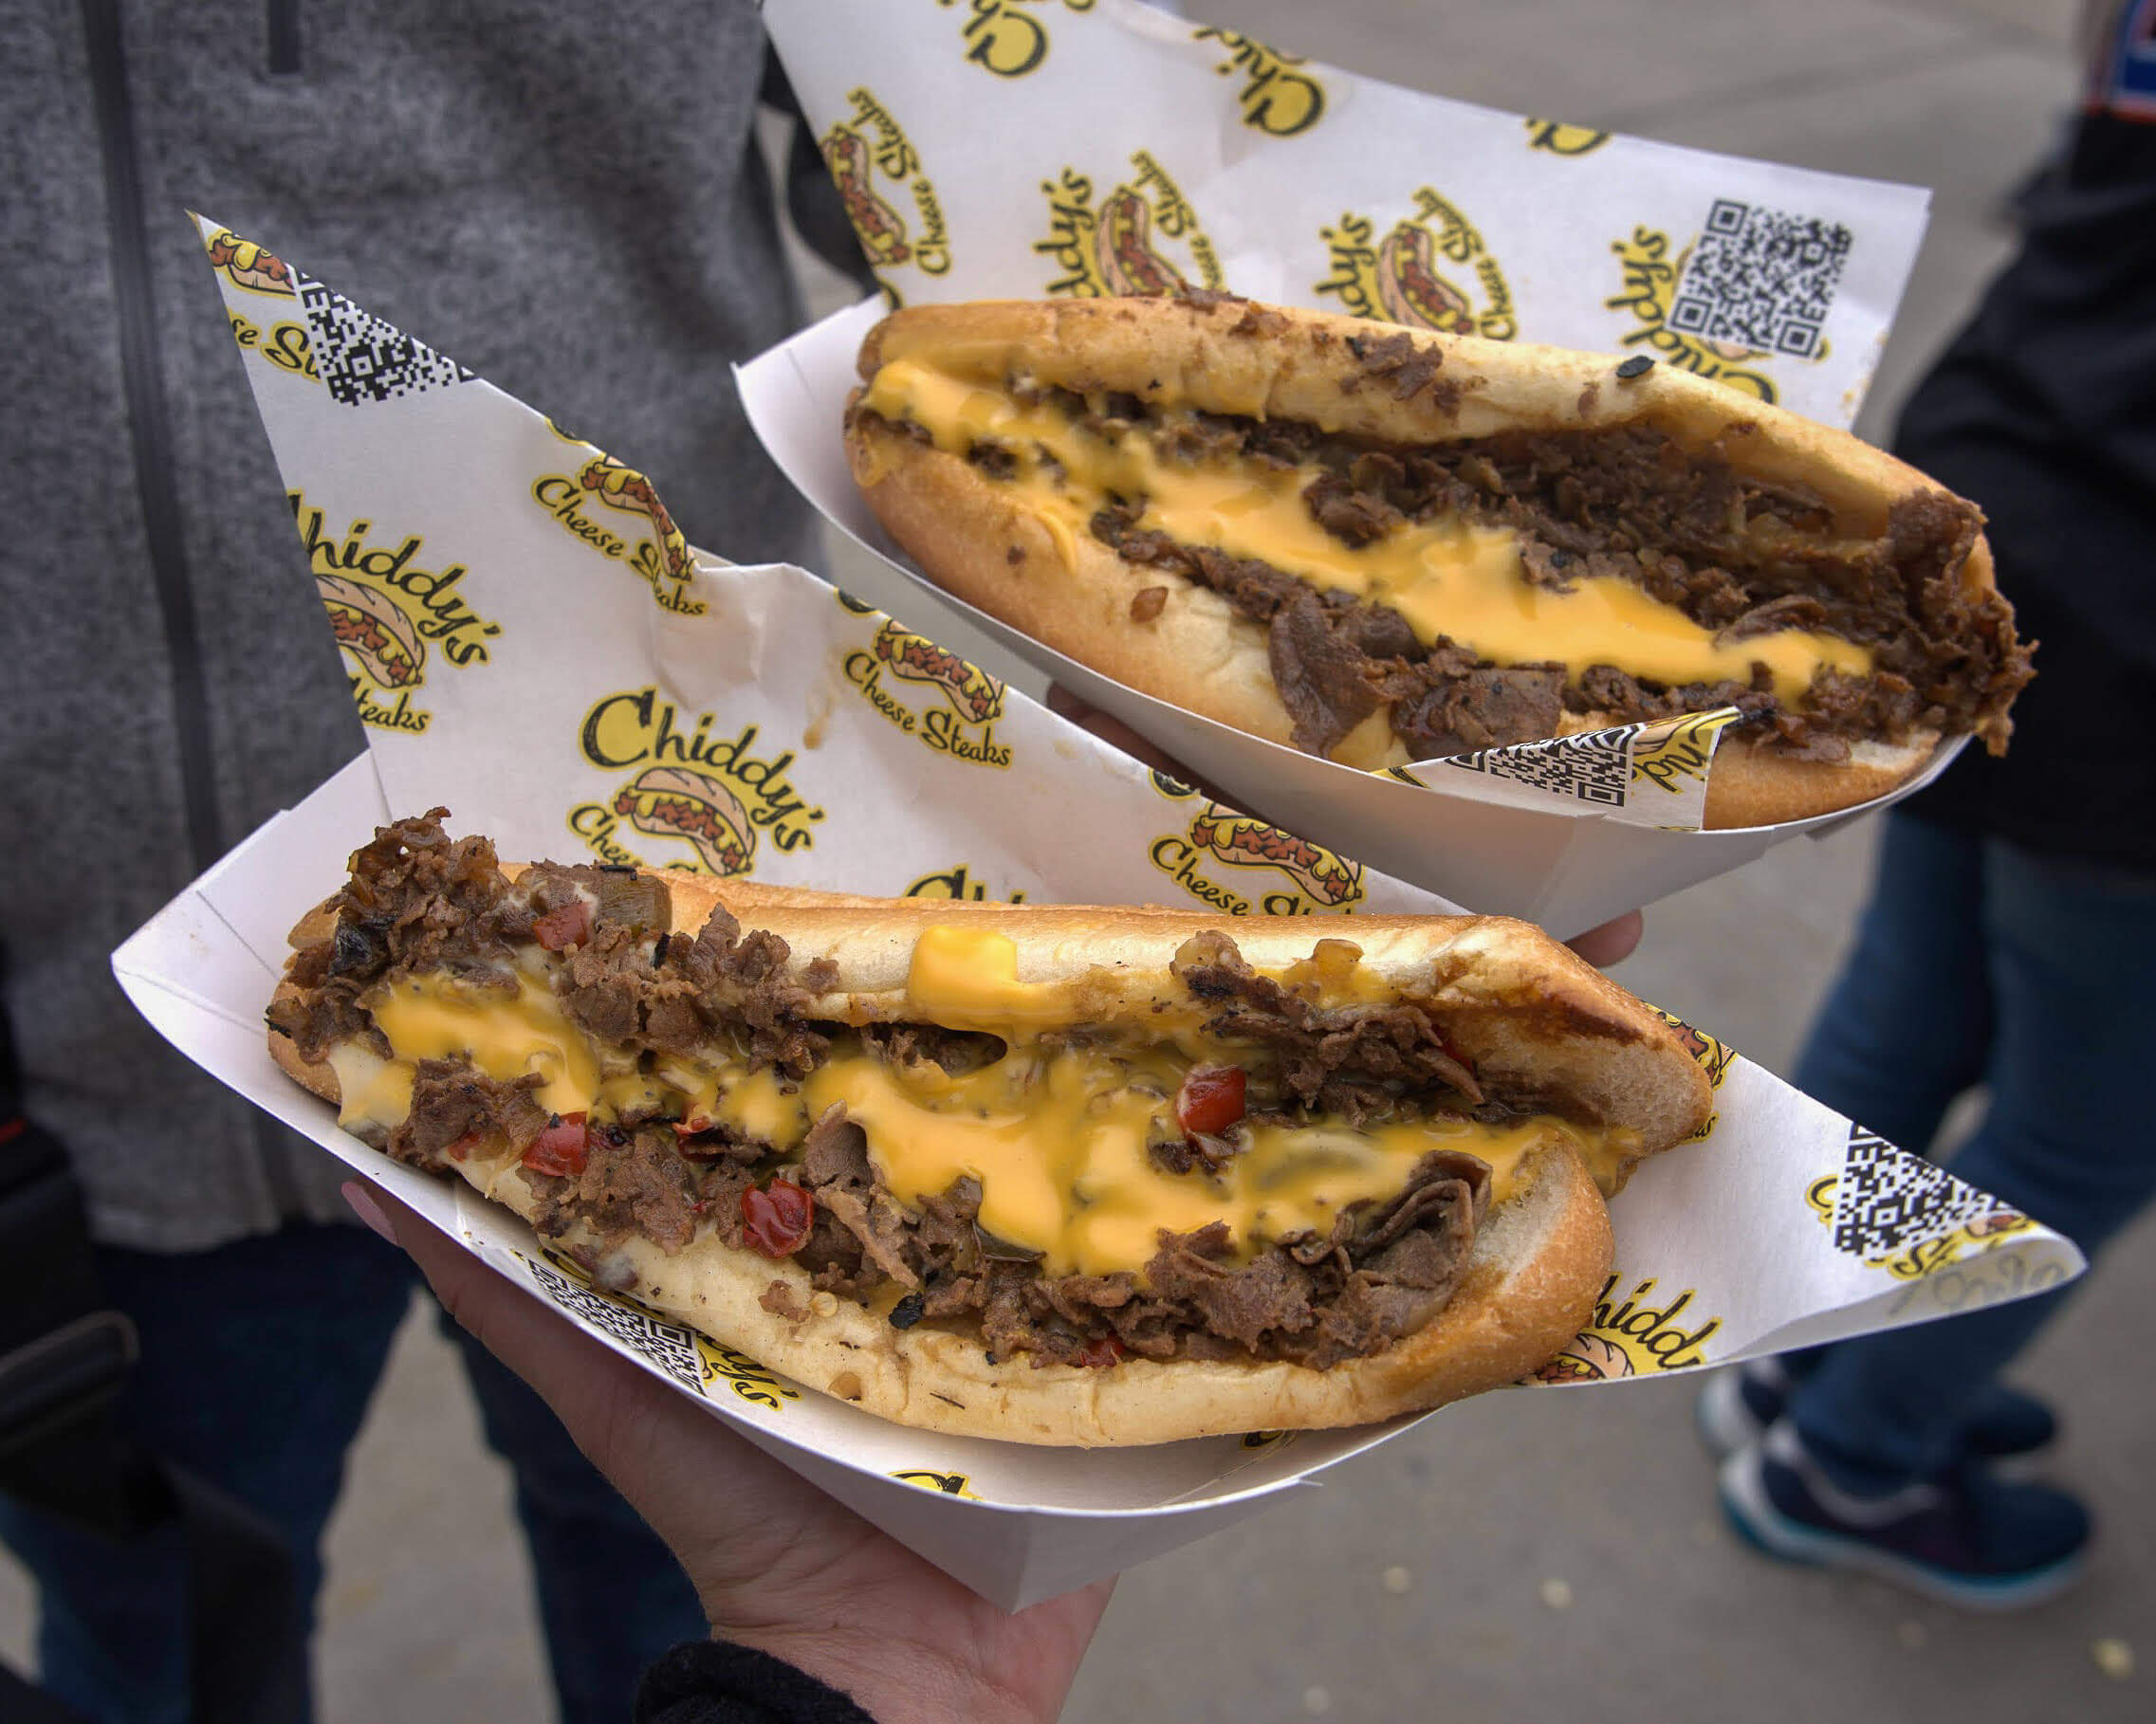 Hands holding two cheesesteaks on toasted long rolls, topped with Cheese Wiz, sitting on Chiddy's Cheesesteak wrapping paper.  